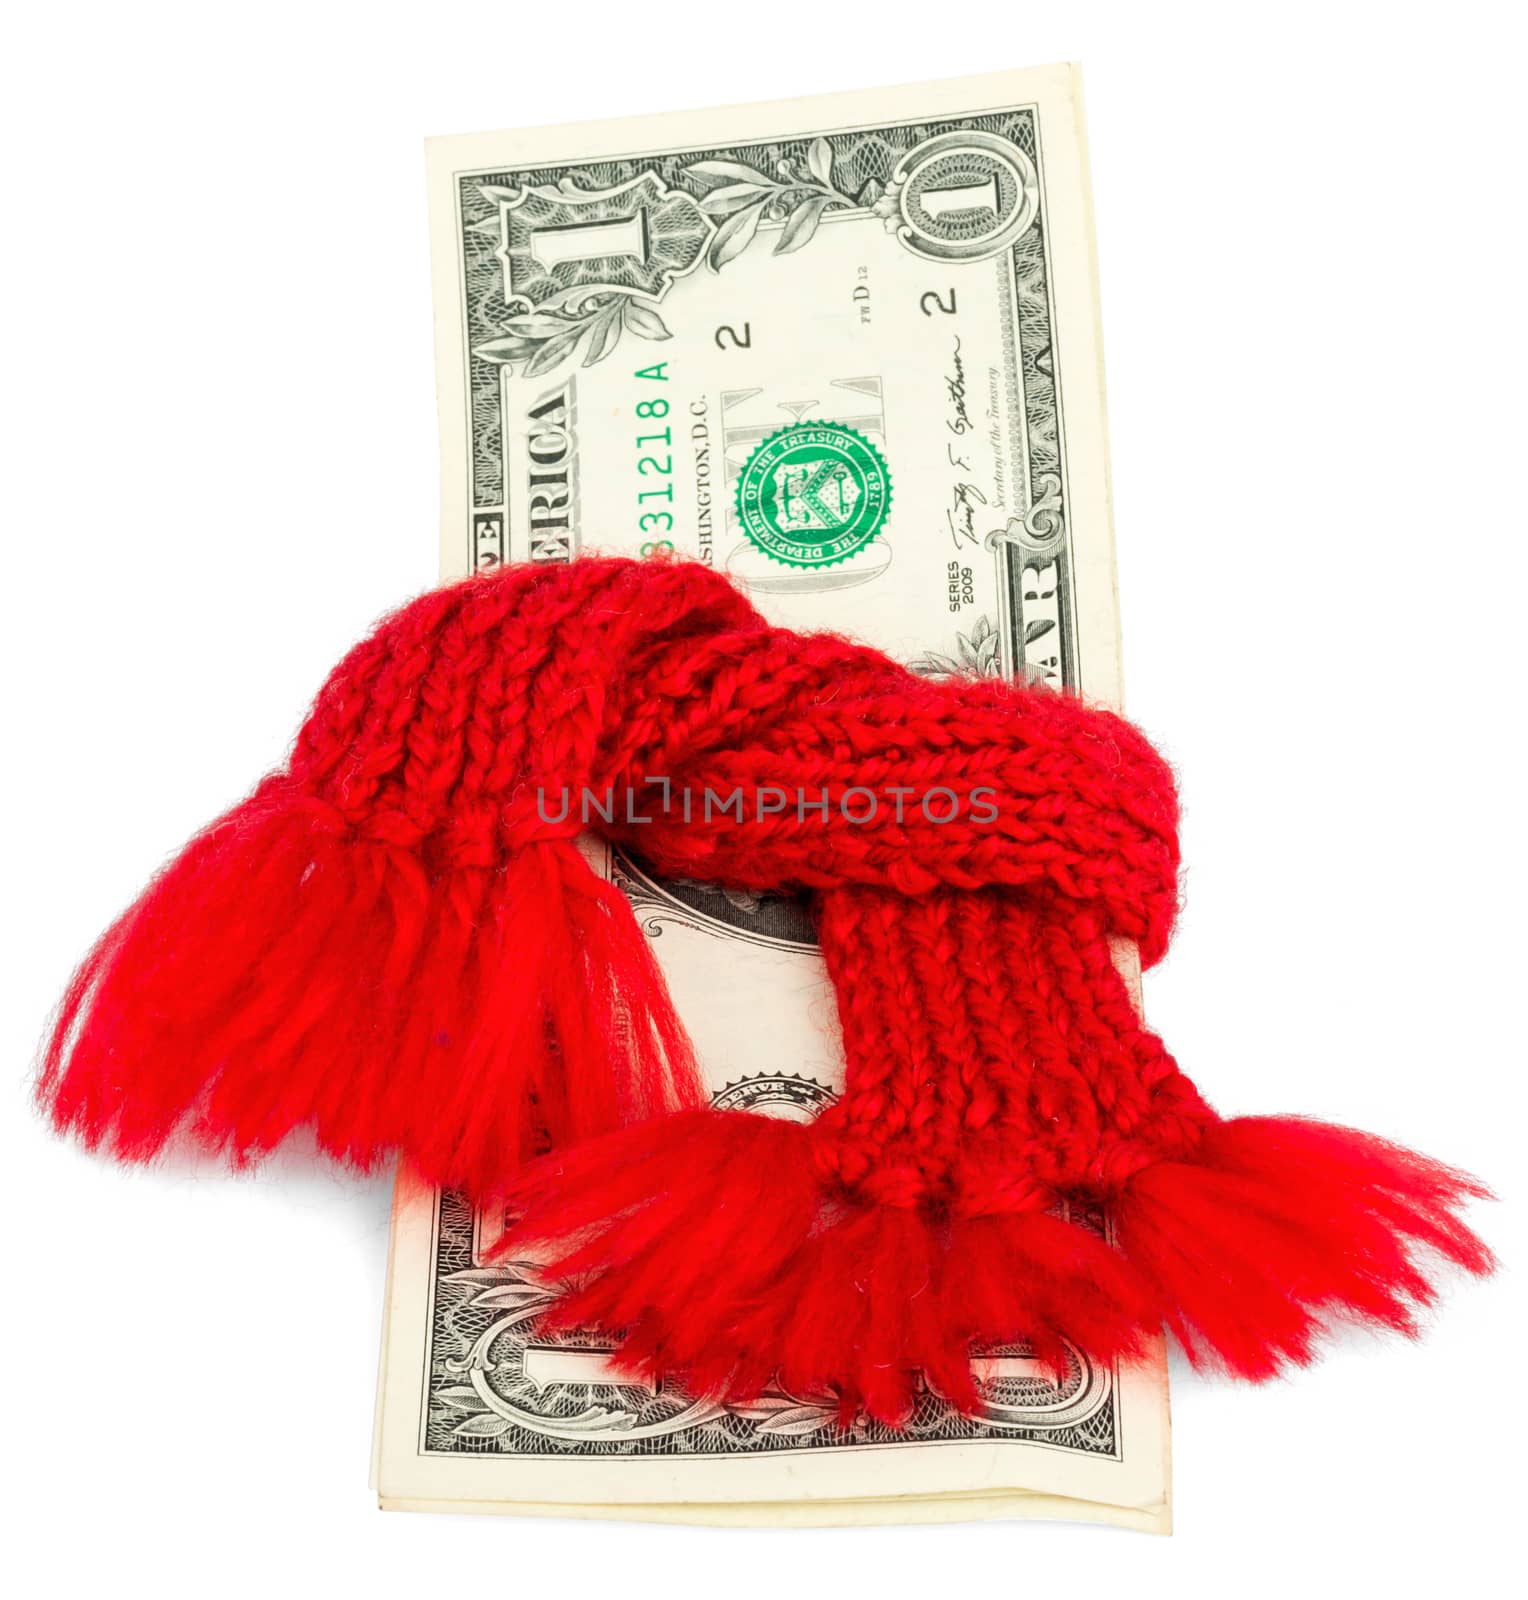 Recovering finances, One dollar banknote with red scarf isolated on white